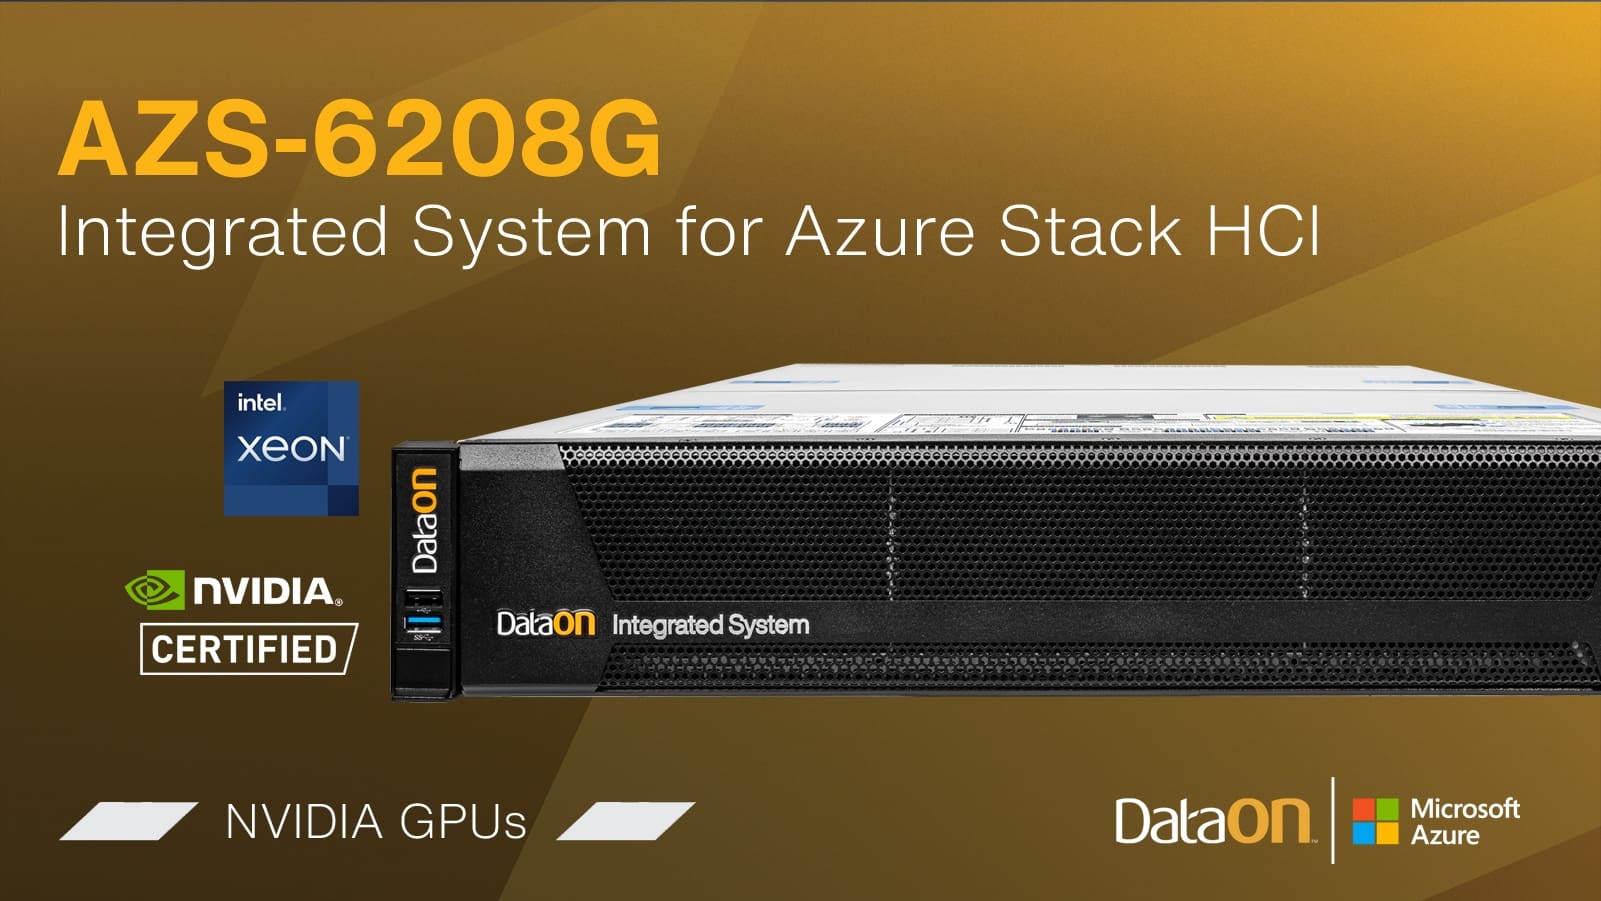 DataON Integrated System with Nvidia GPU and VDI - High-performance Virtual Desktop Infrastructure for graphics-intensive workloads.